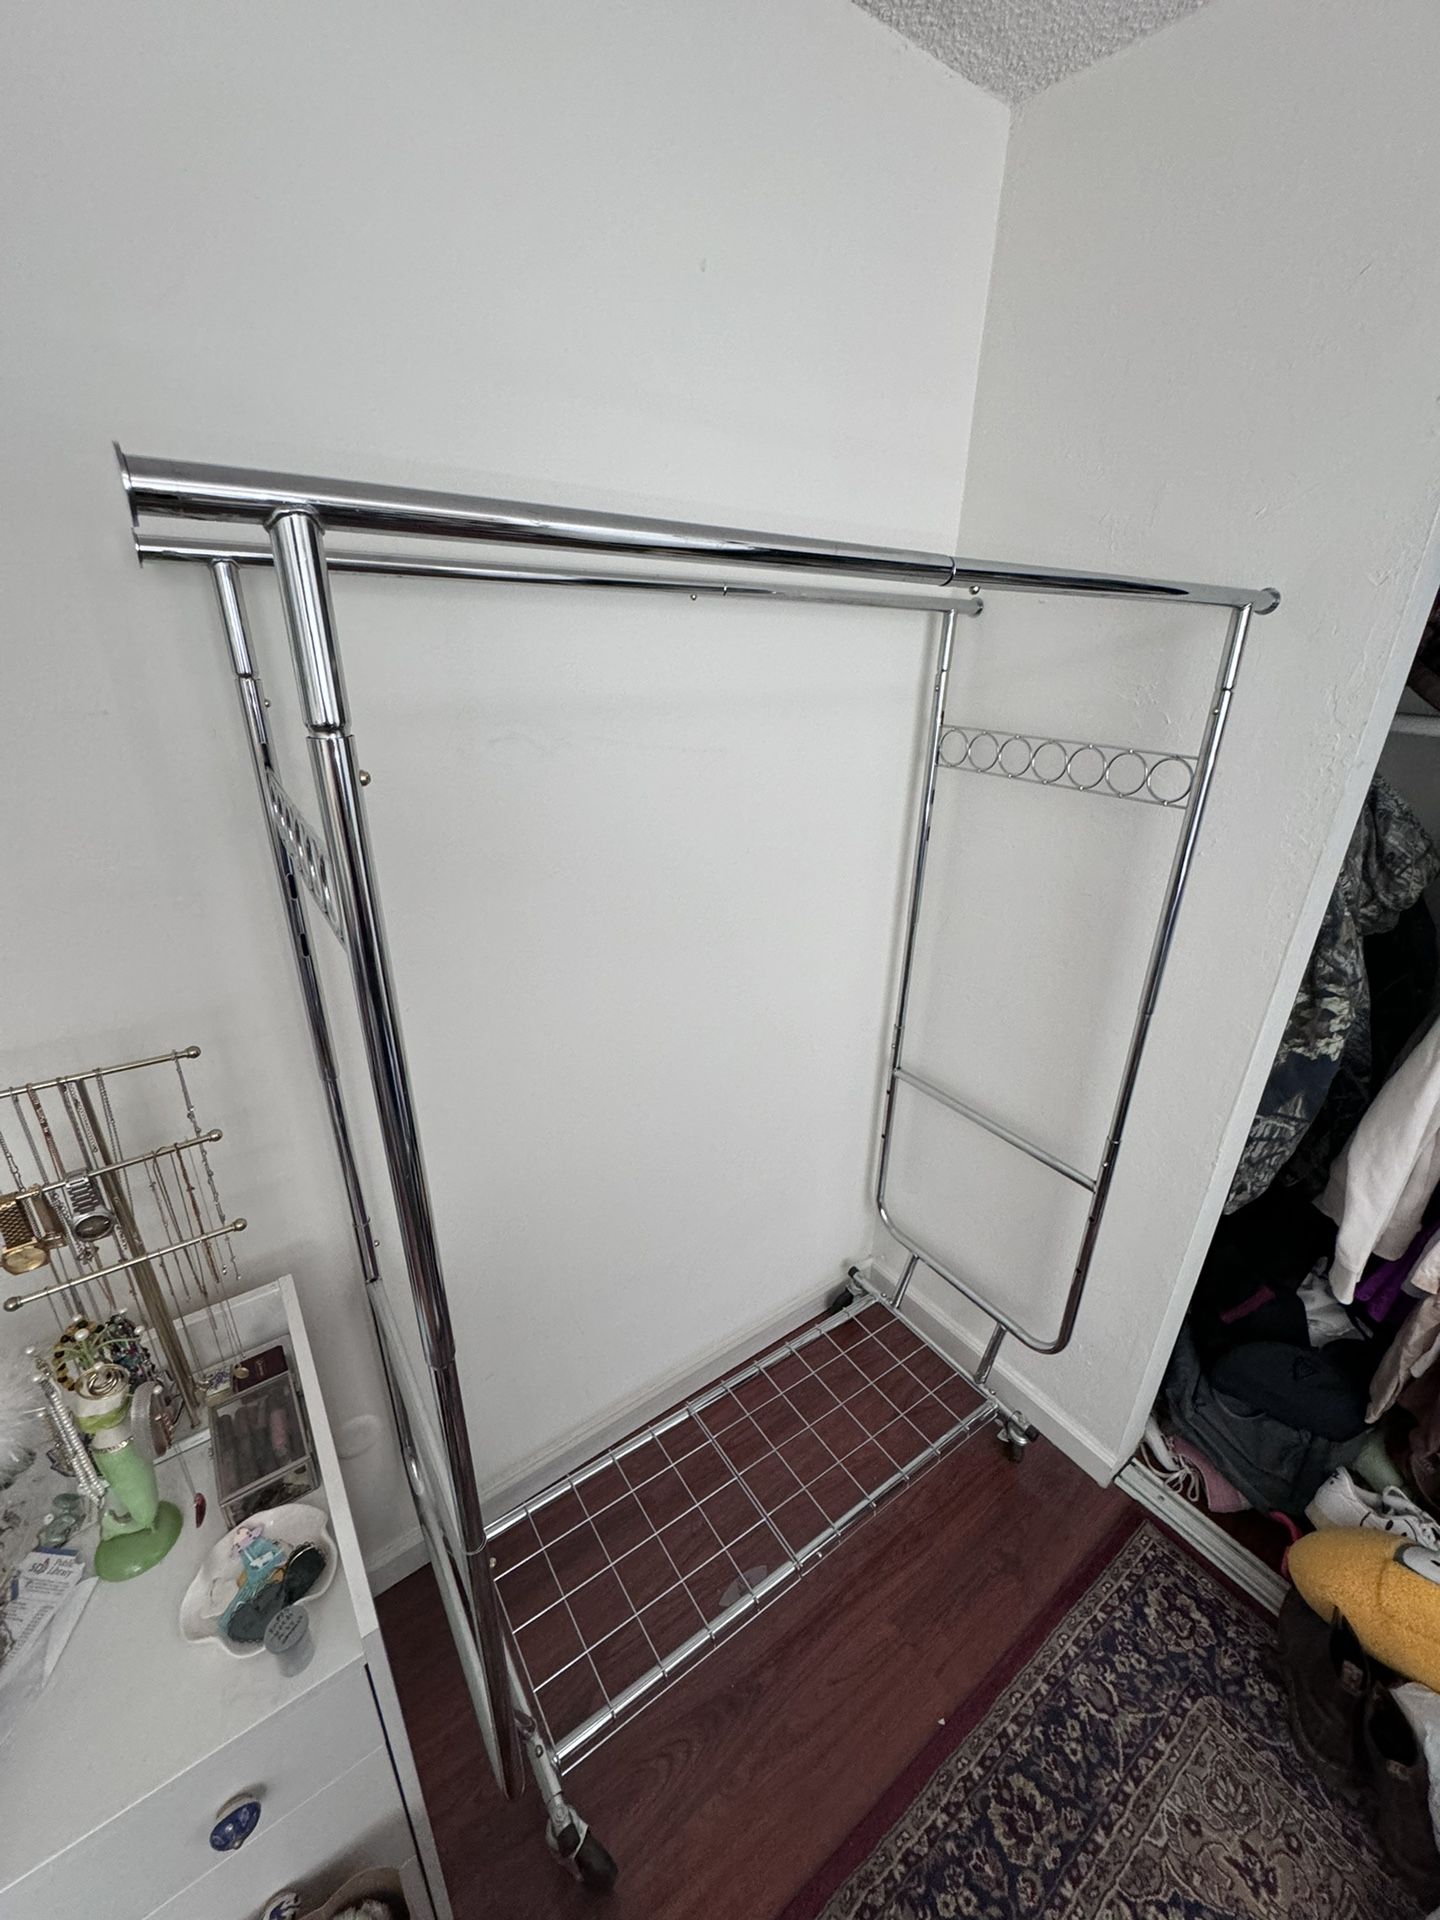 Collapsable and Adjustable Clothing/Storage Rack